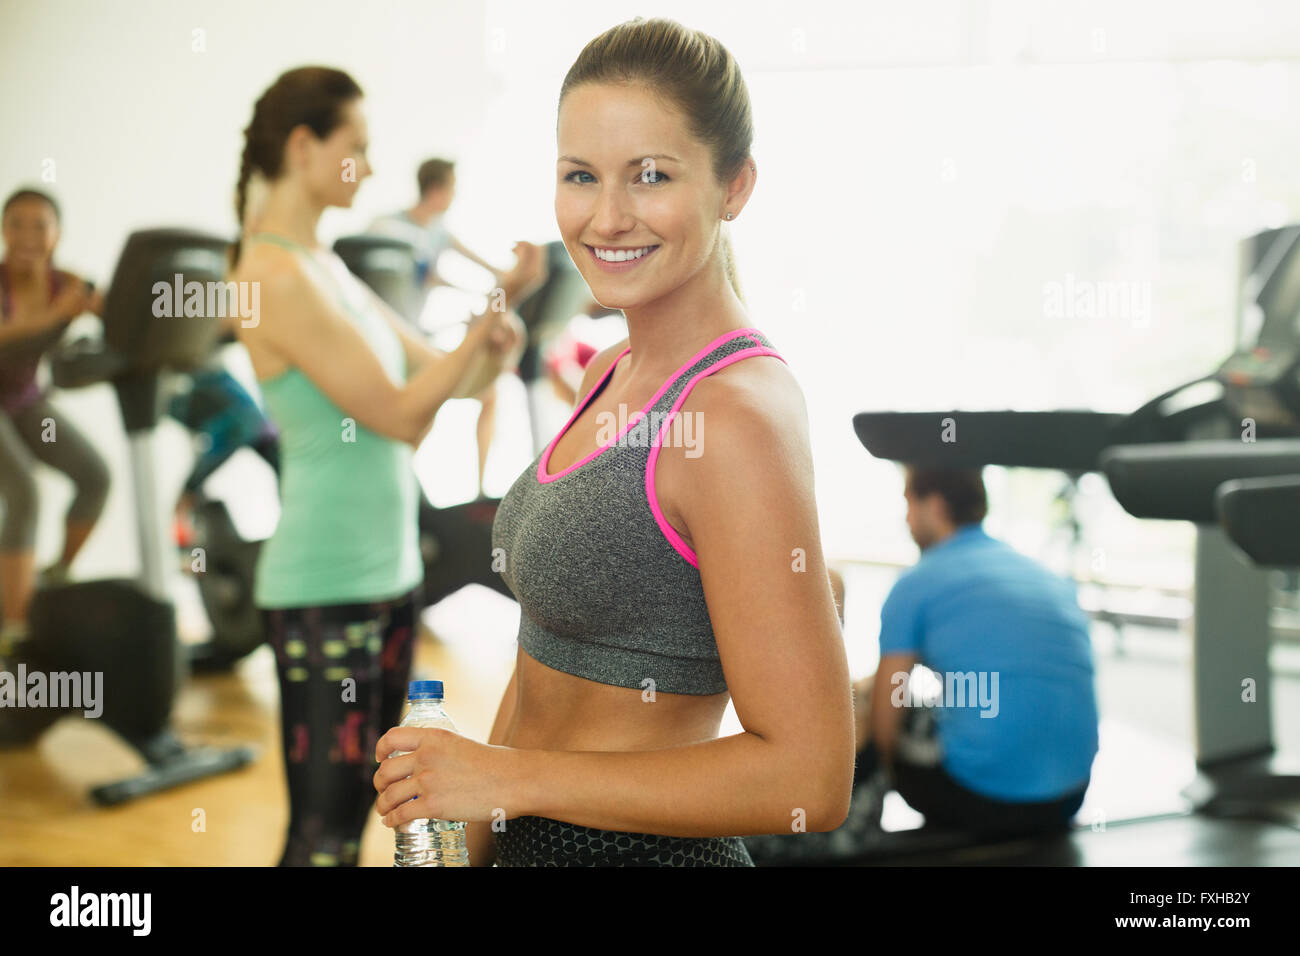 Portrait smiling woman resting at gym Stock Photo